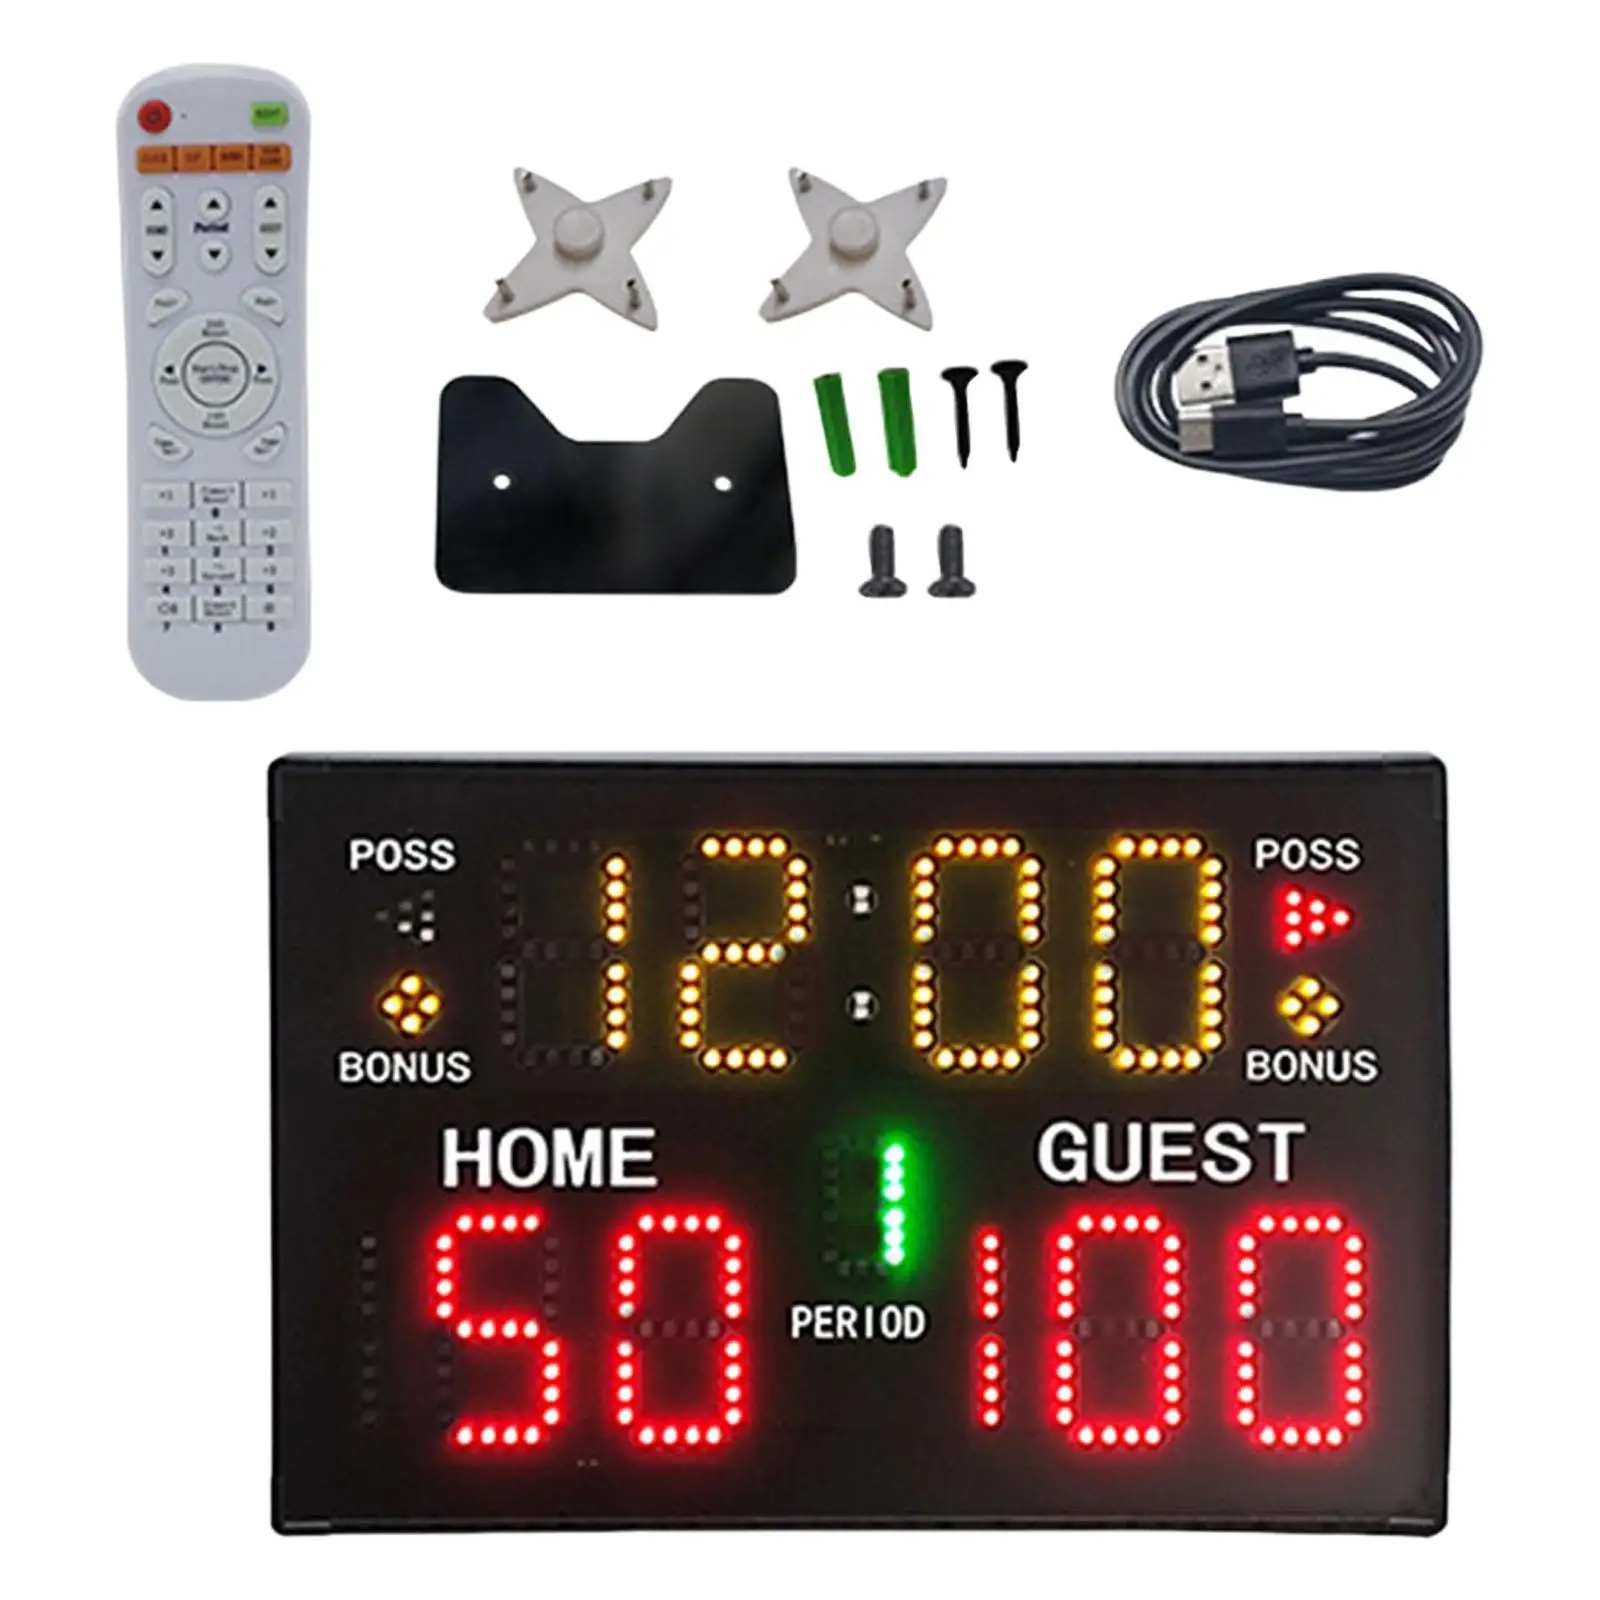 Digital Scoreboard Wall Hanging Portable with Remote Score Keeper Electronic Scoreboard for Volleyball Outdoor Tennis Boxing